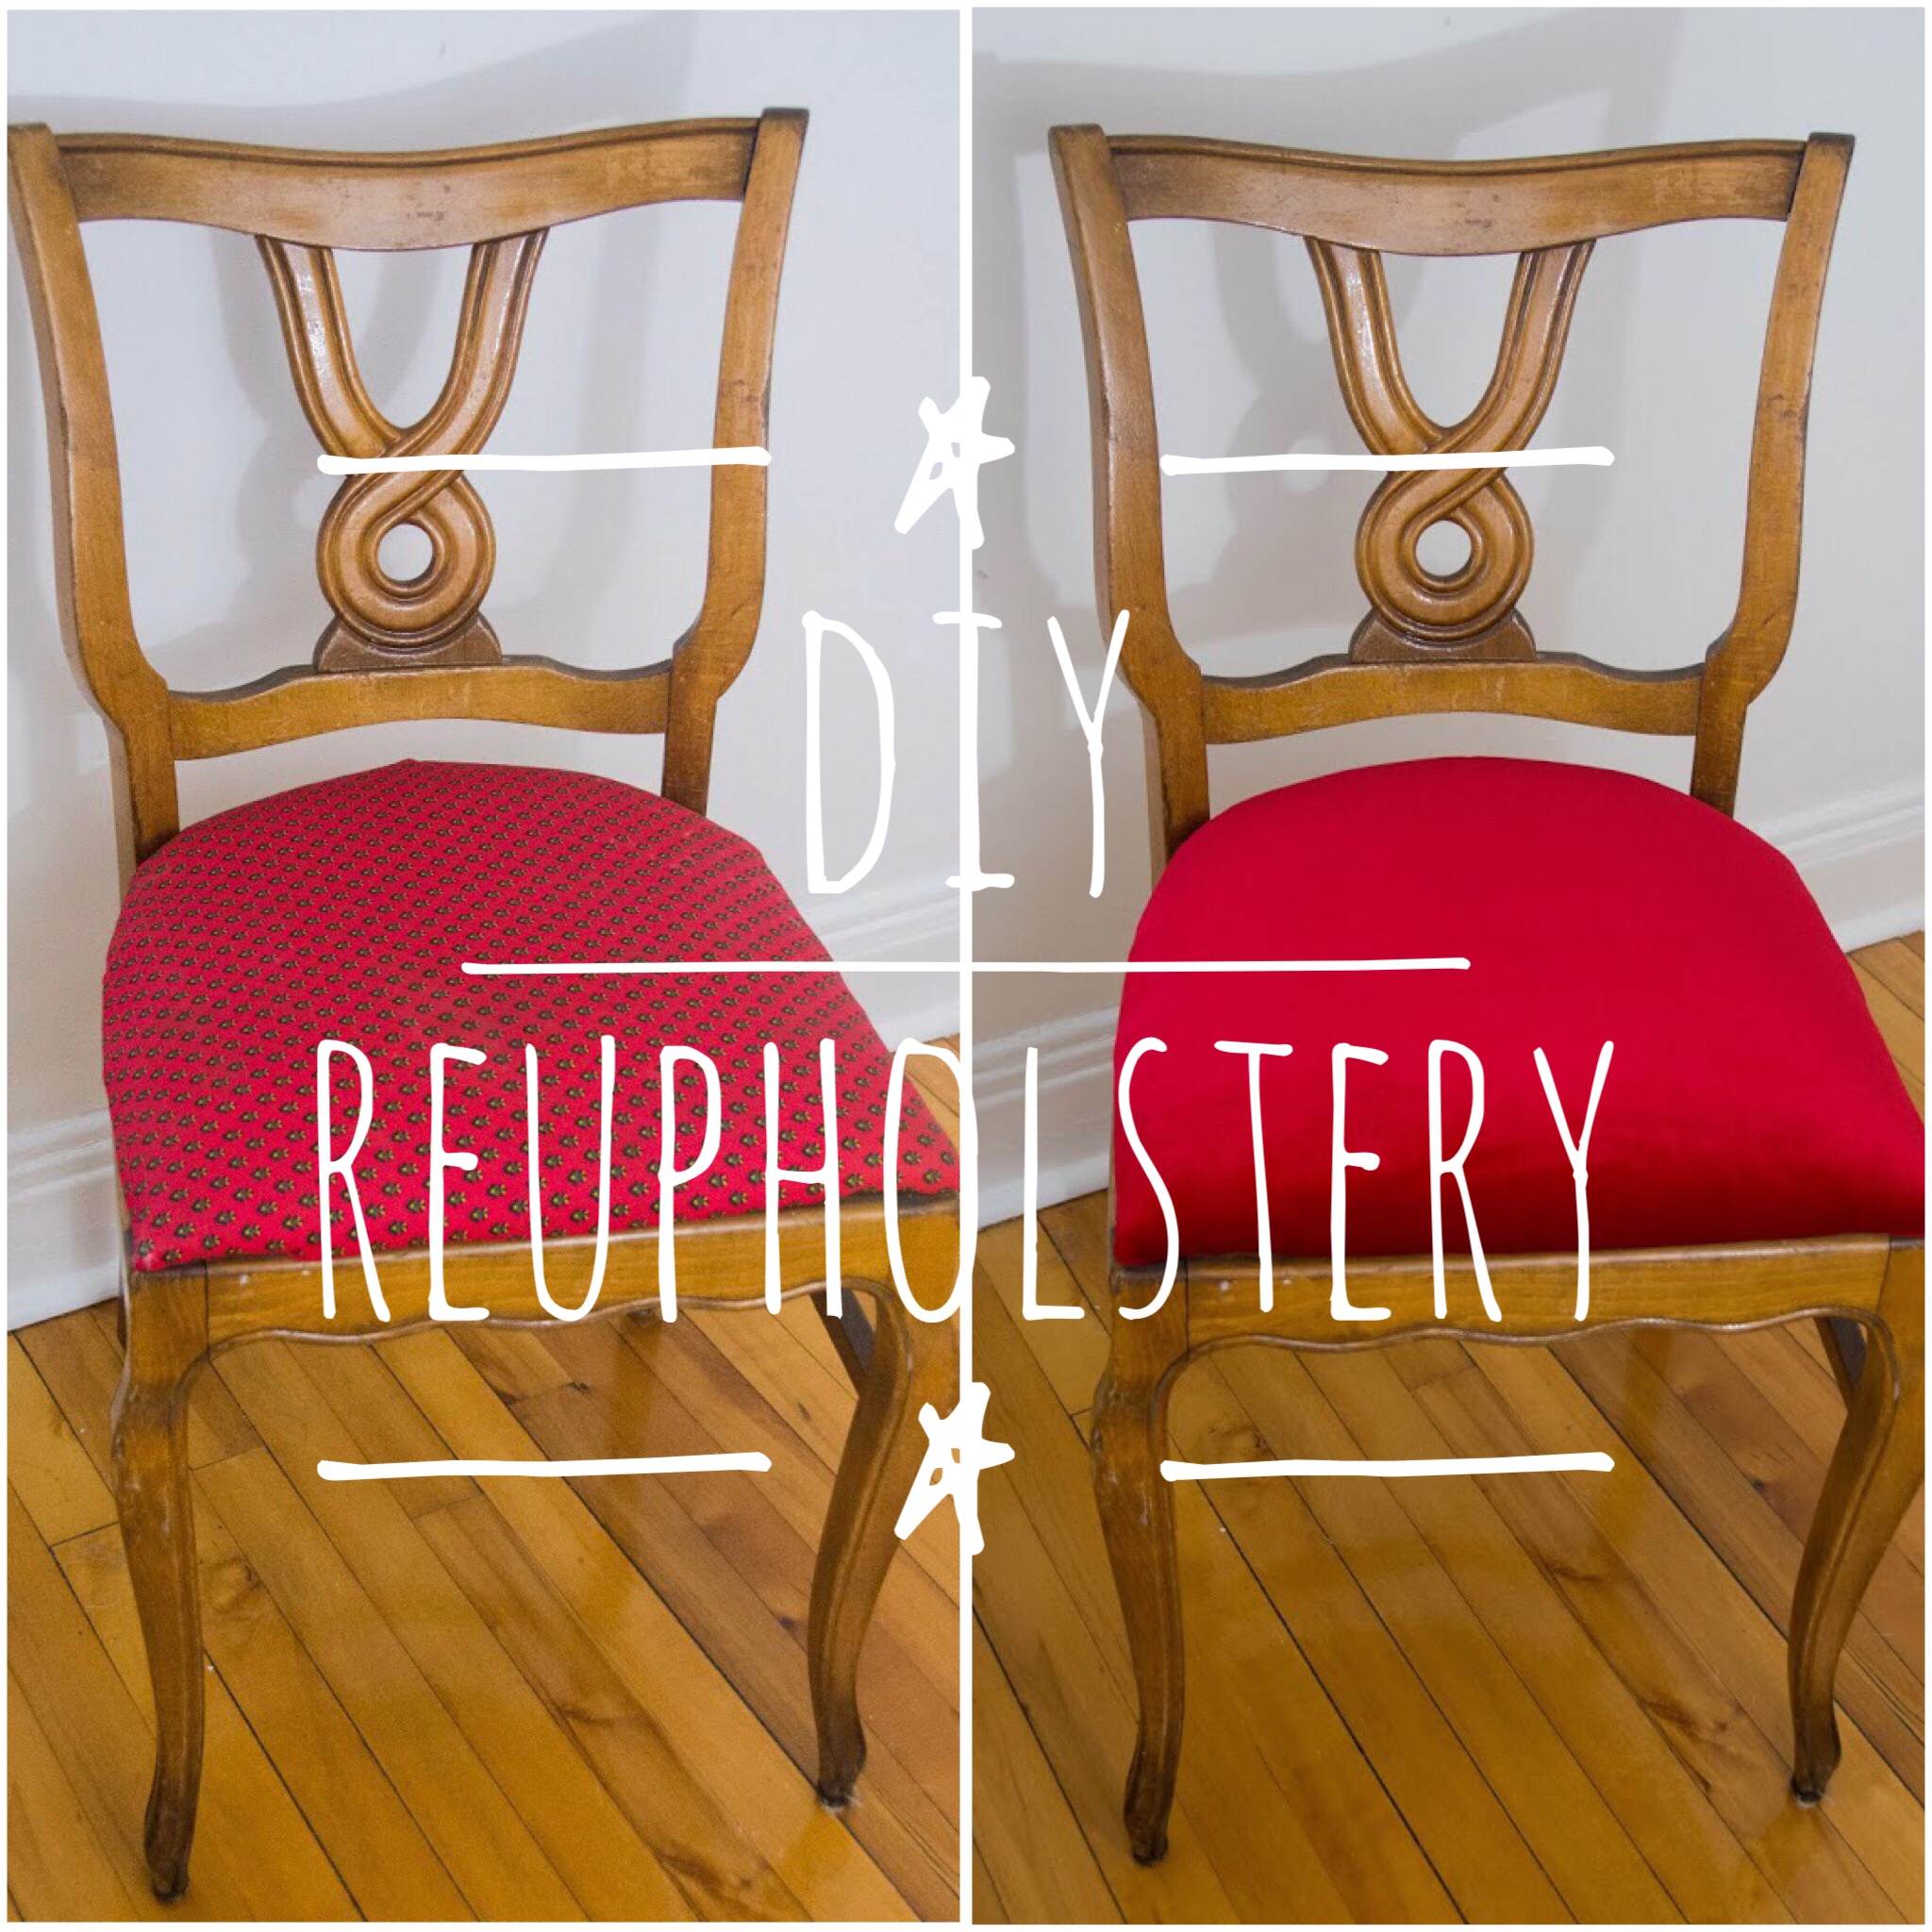 Reupholster Chair Montreal - Pin by Hilary Mandler on My Upholstery